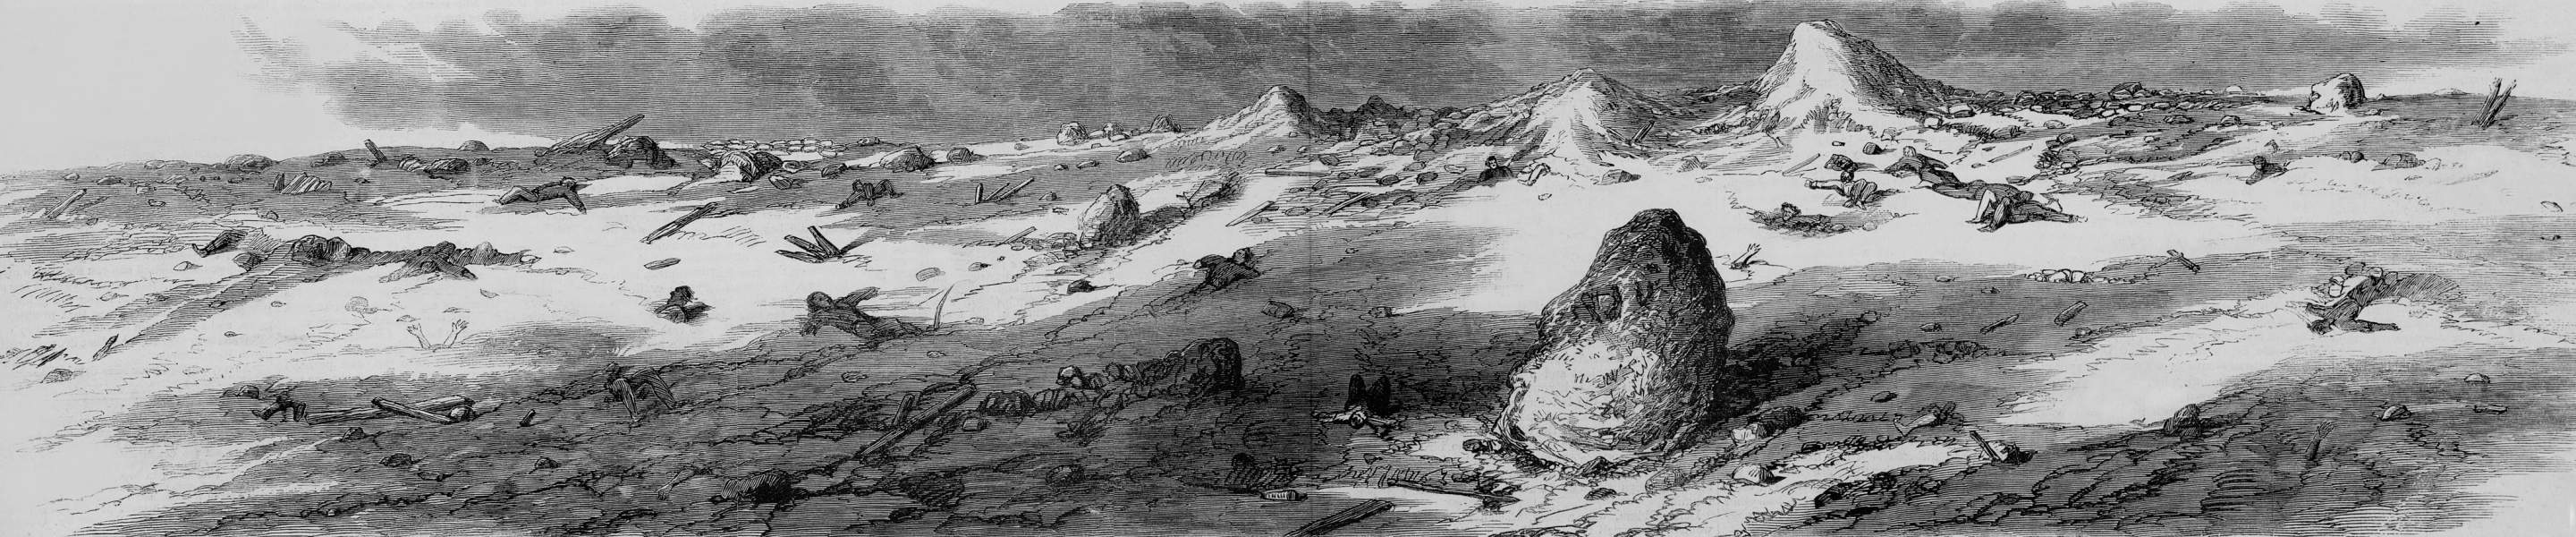 Aftermath of the fighting in the Crater, Petersburg, Virginia, July 30, 1864, artist's impression, zoomable image